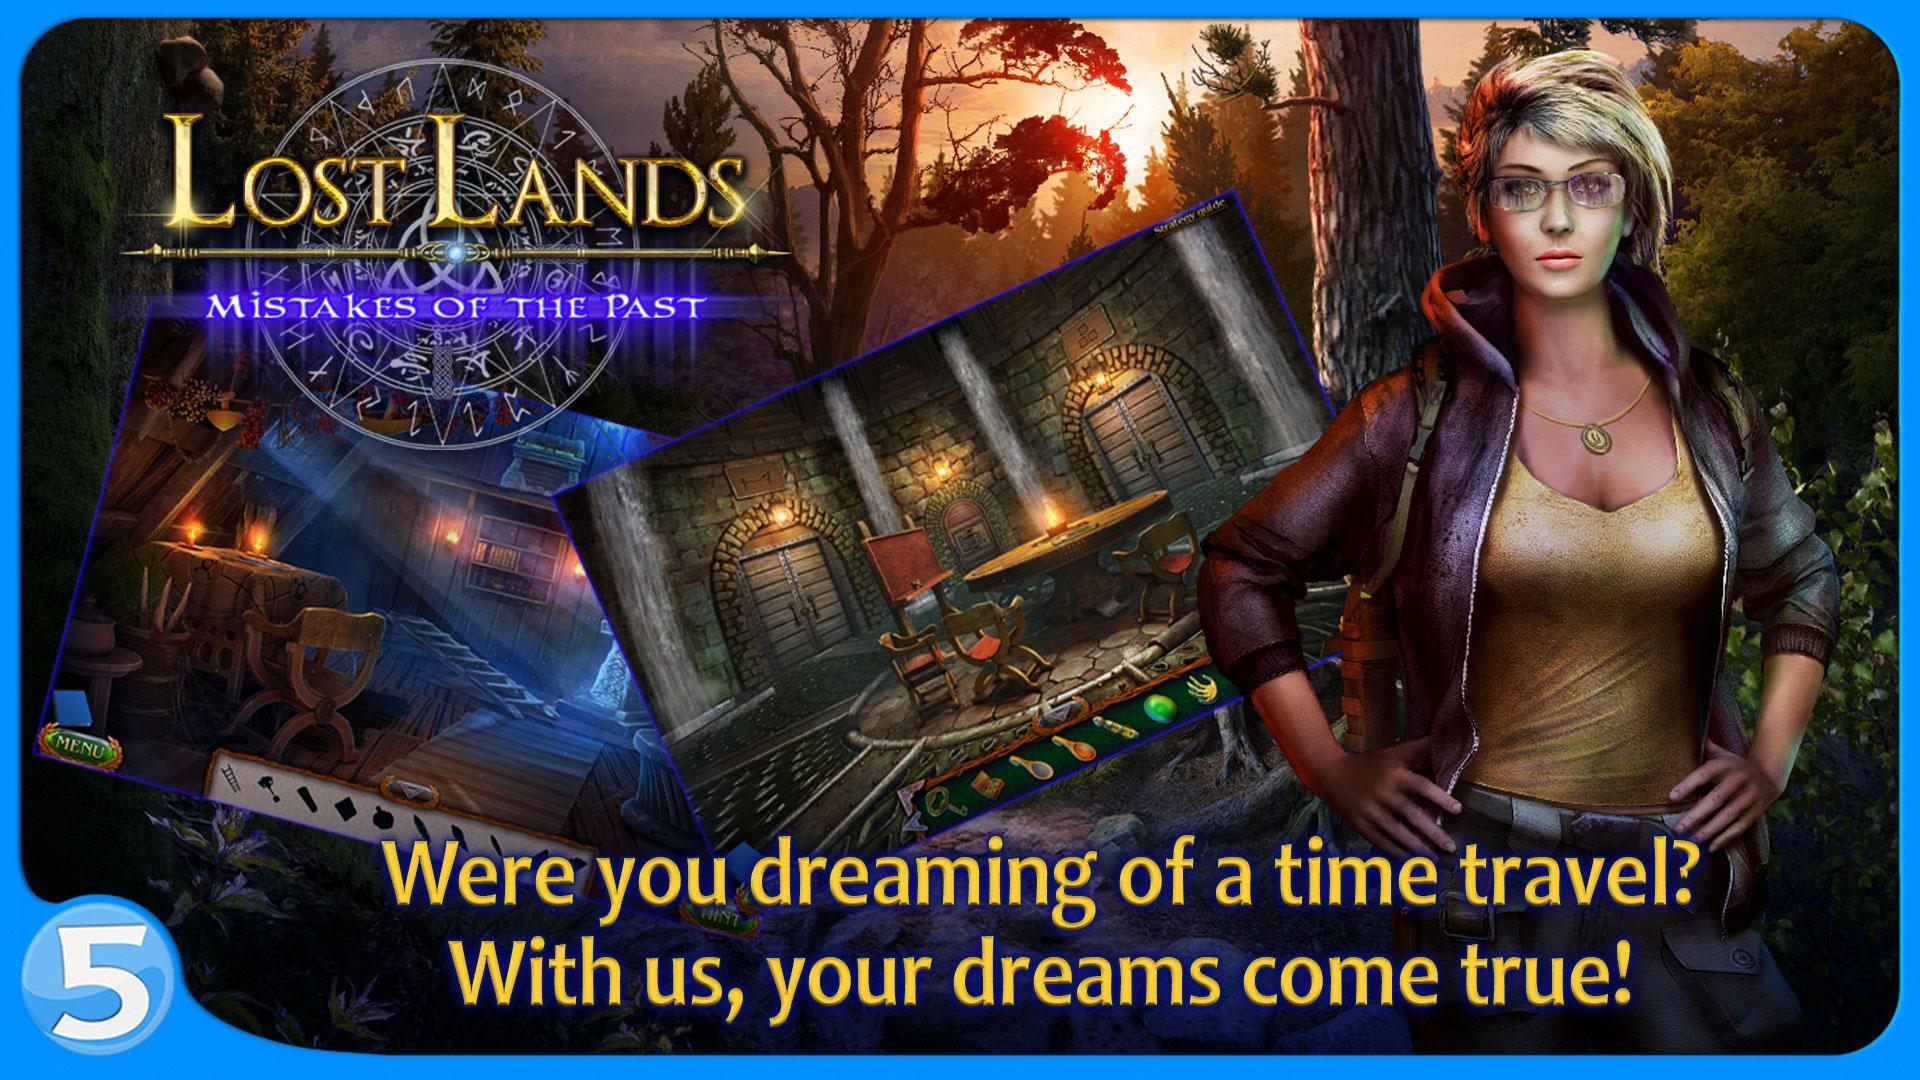 Lost Lands: Mistakes of the Past screenshot game